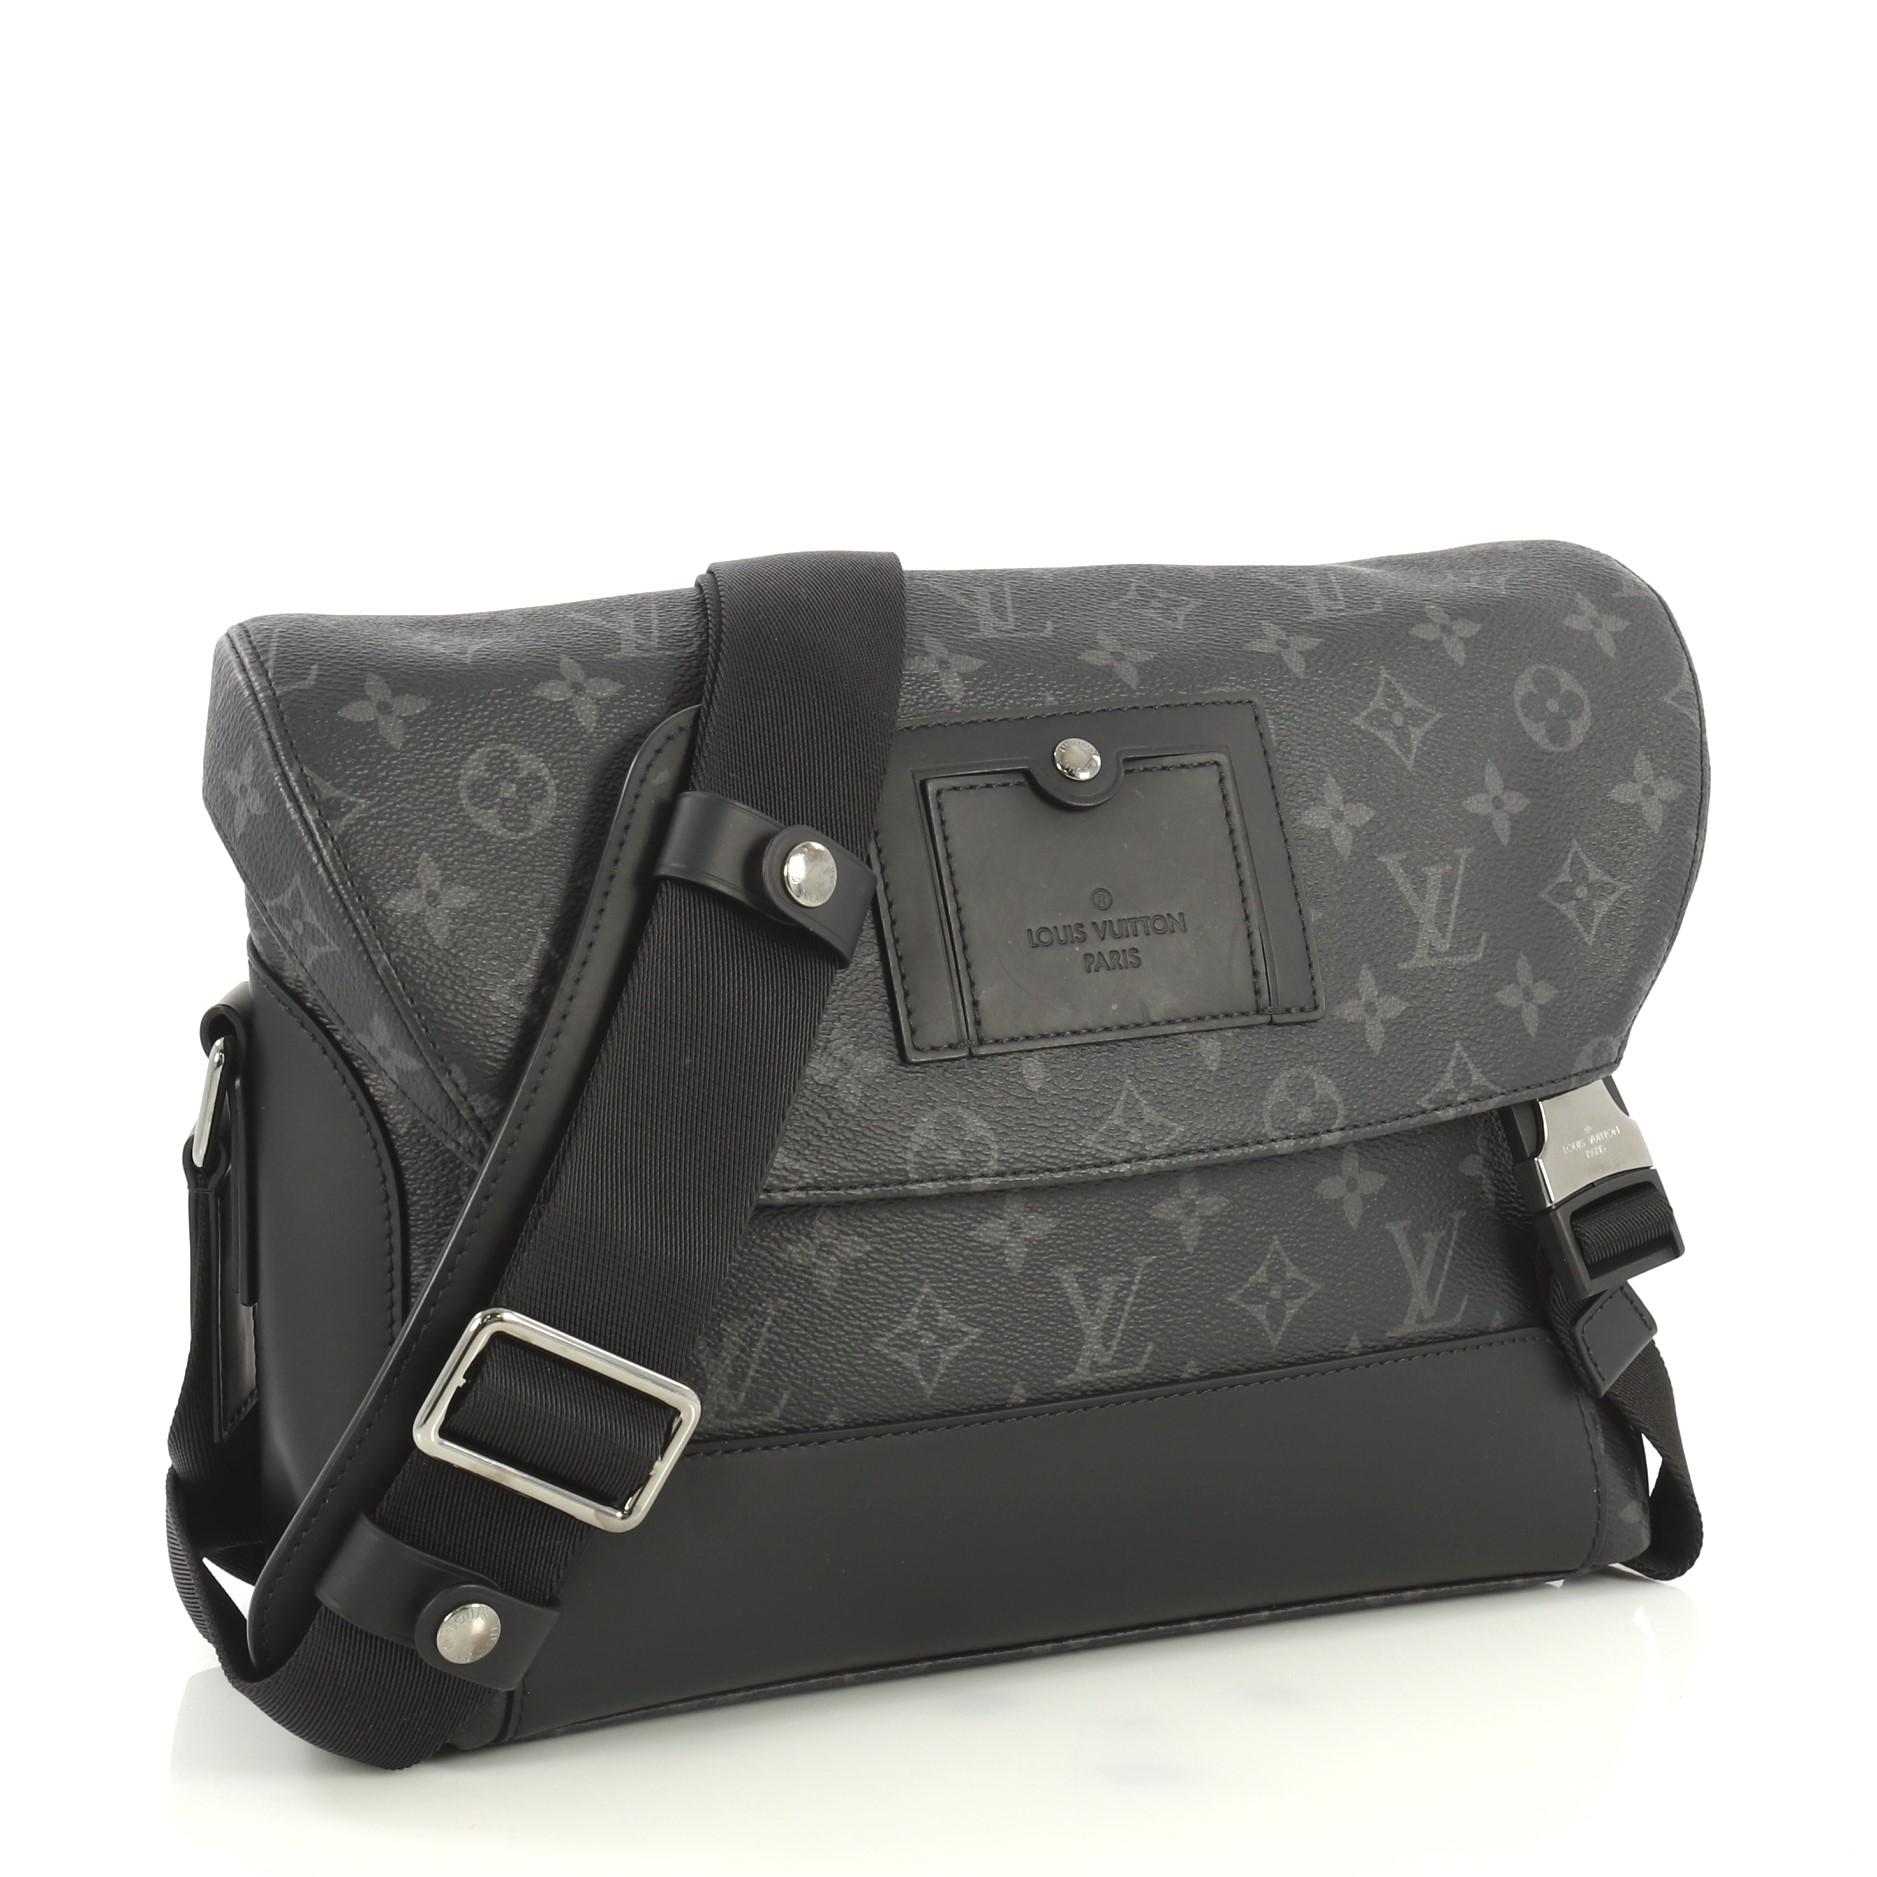 This Louis Vuitton Voyager Messenger Bag Monogram Eclipse Canvas PM, crafted from black monogram eclipse coated canvas, features an adjustable strap and silver-tone hardware. Its flap with buckle closures open to a black fabric interior with zip and